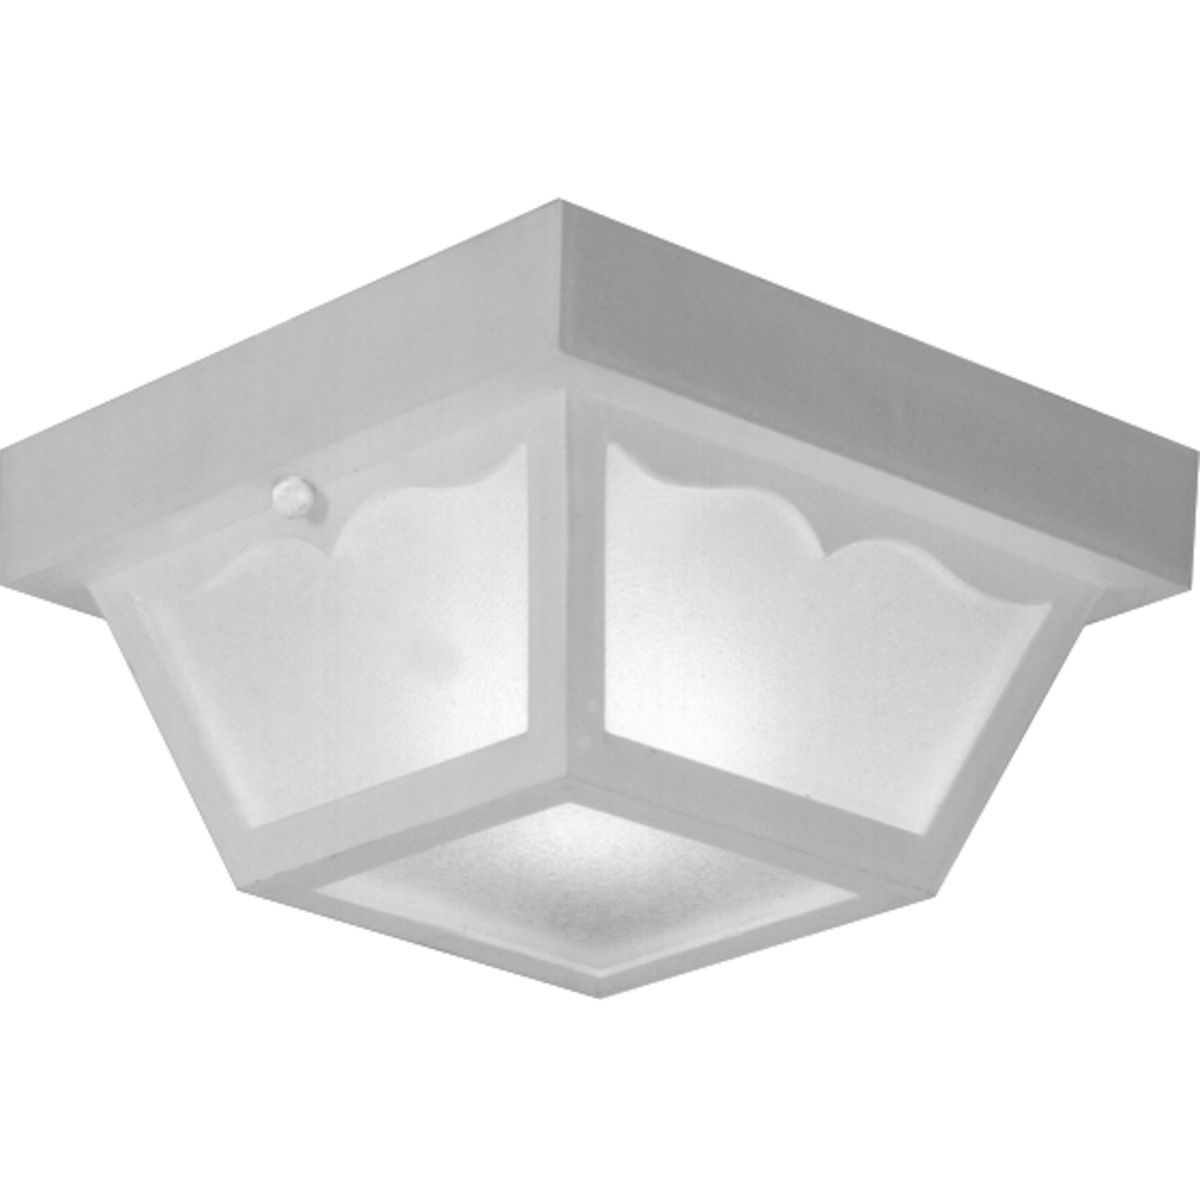 One-light non-metallic ceiling light with one-piece white acrylic diffuser and scalloped detail. White finish.